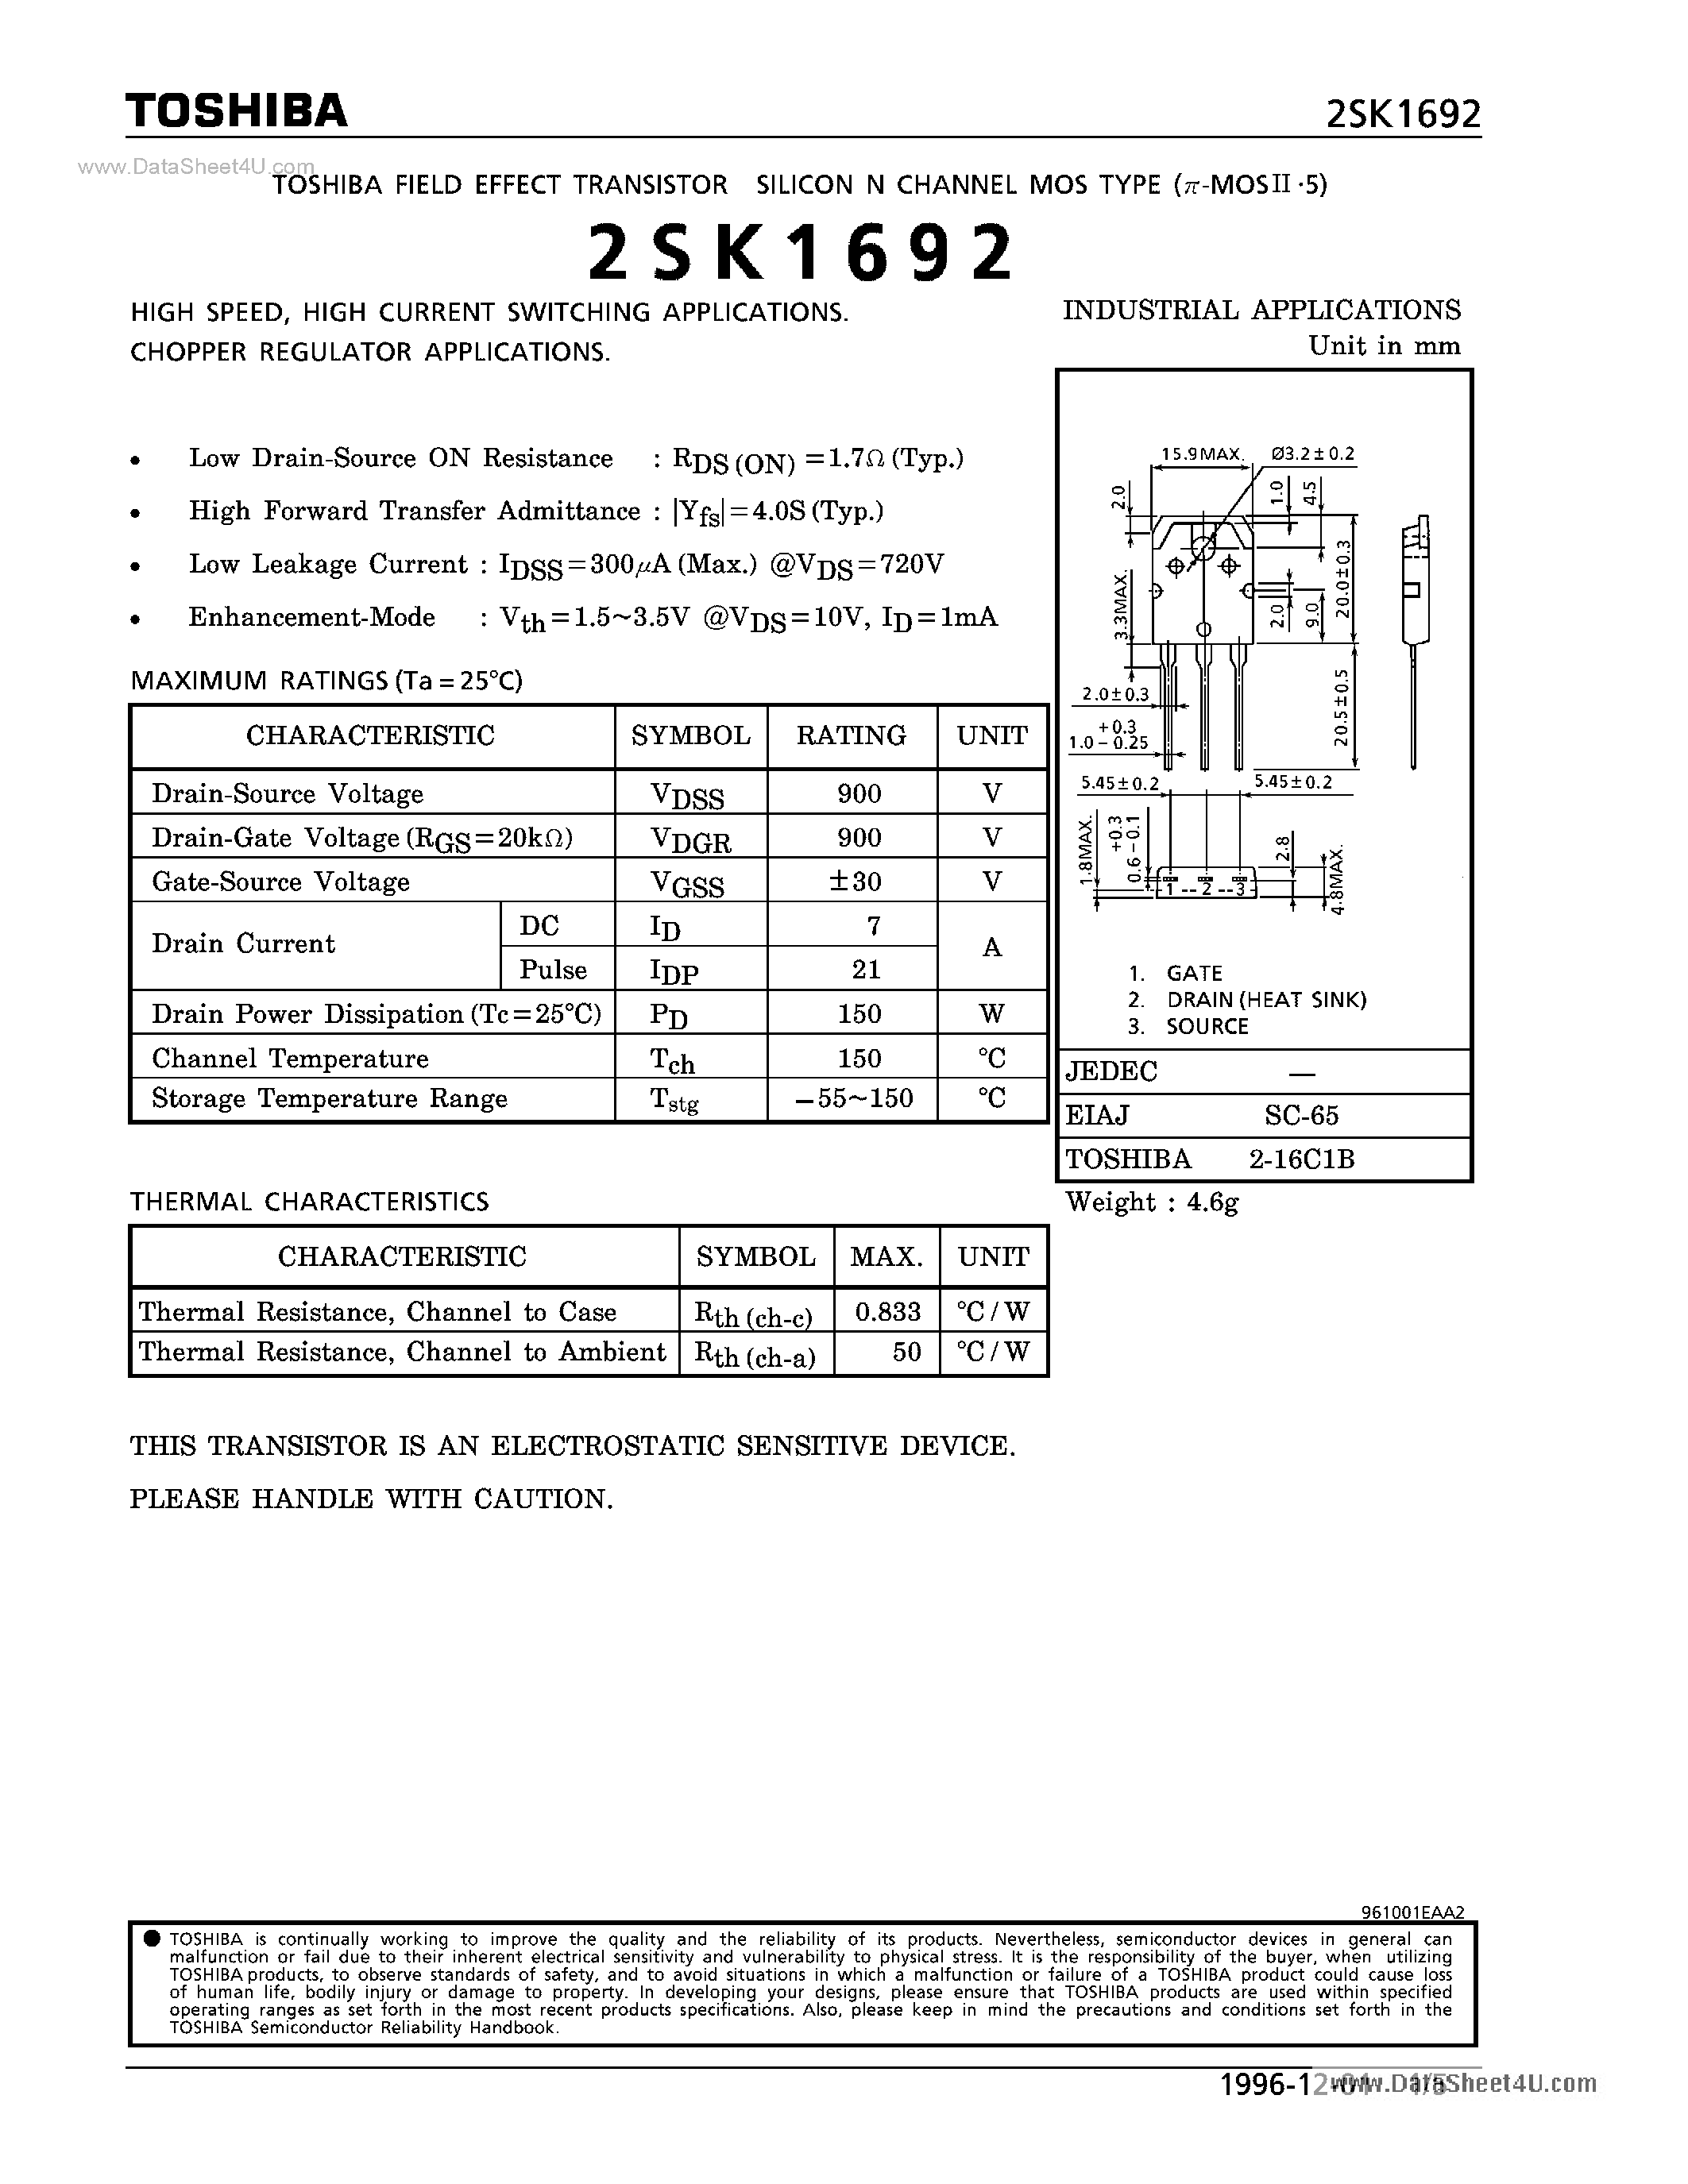 Datasheet K1692 - Search -----> 2SK1692 page 1